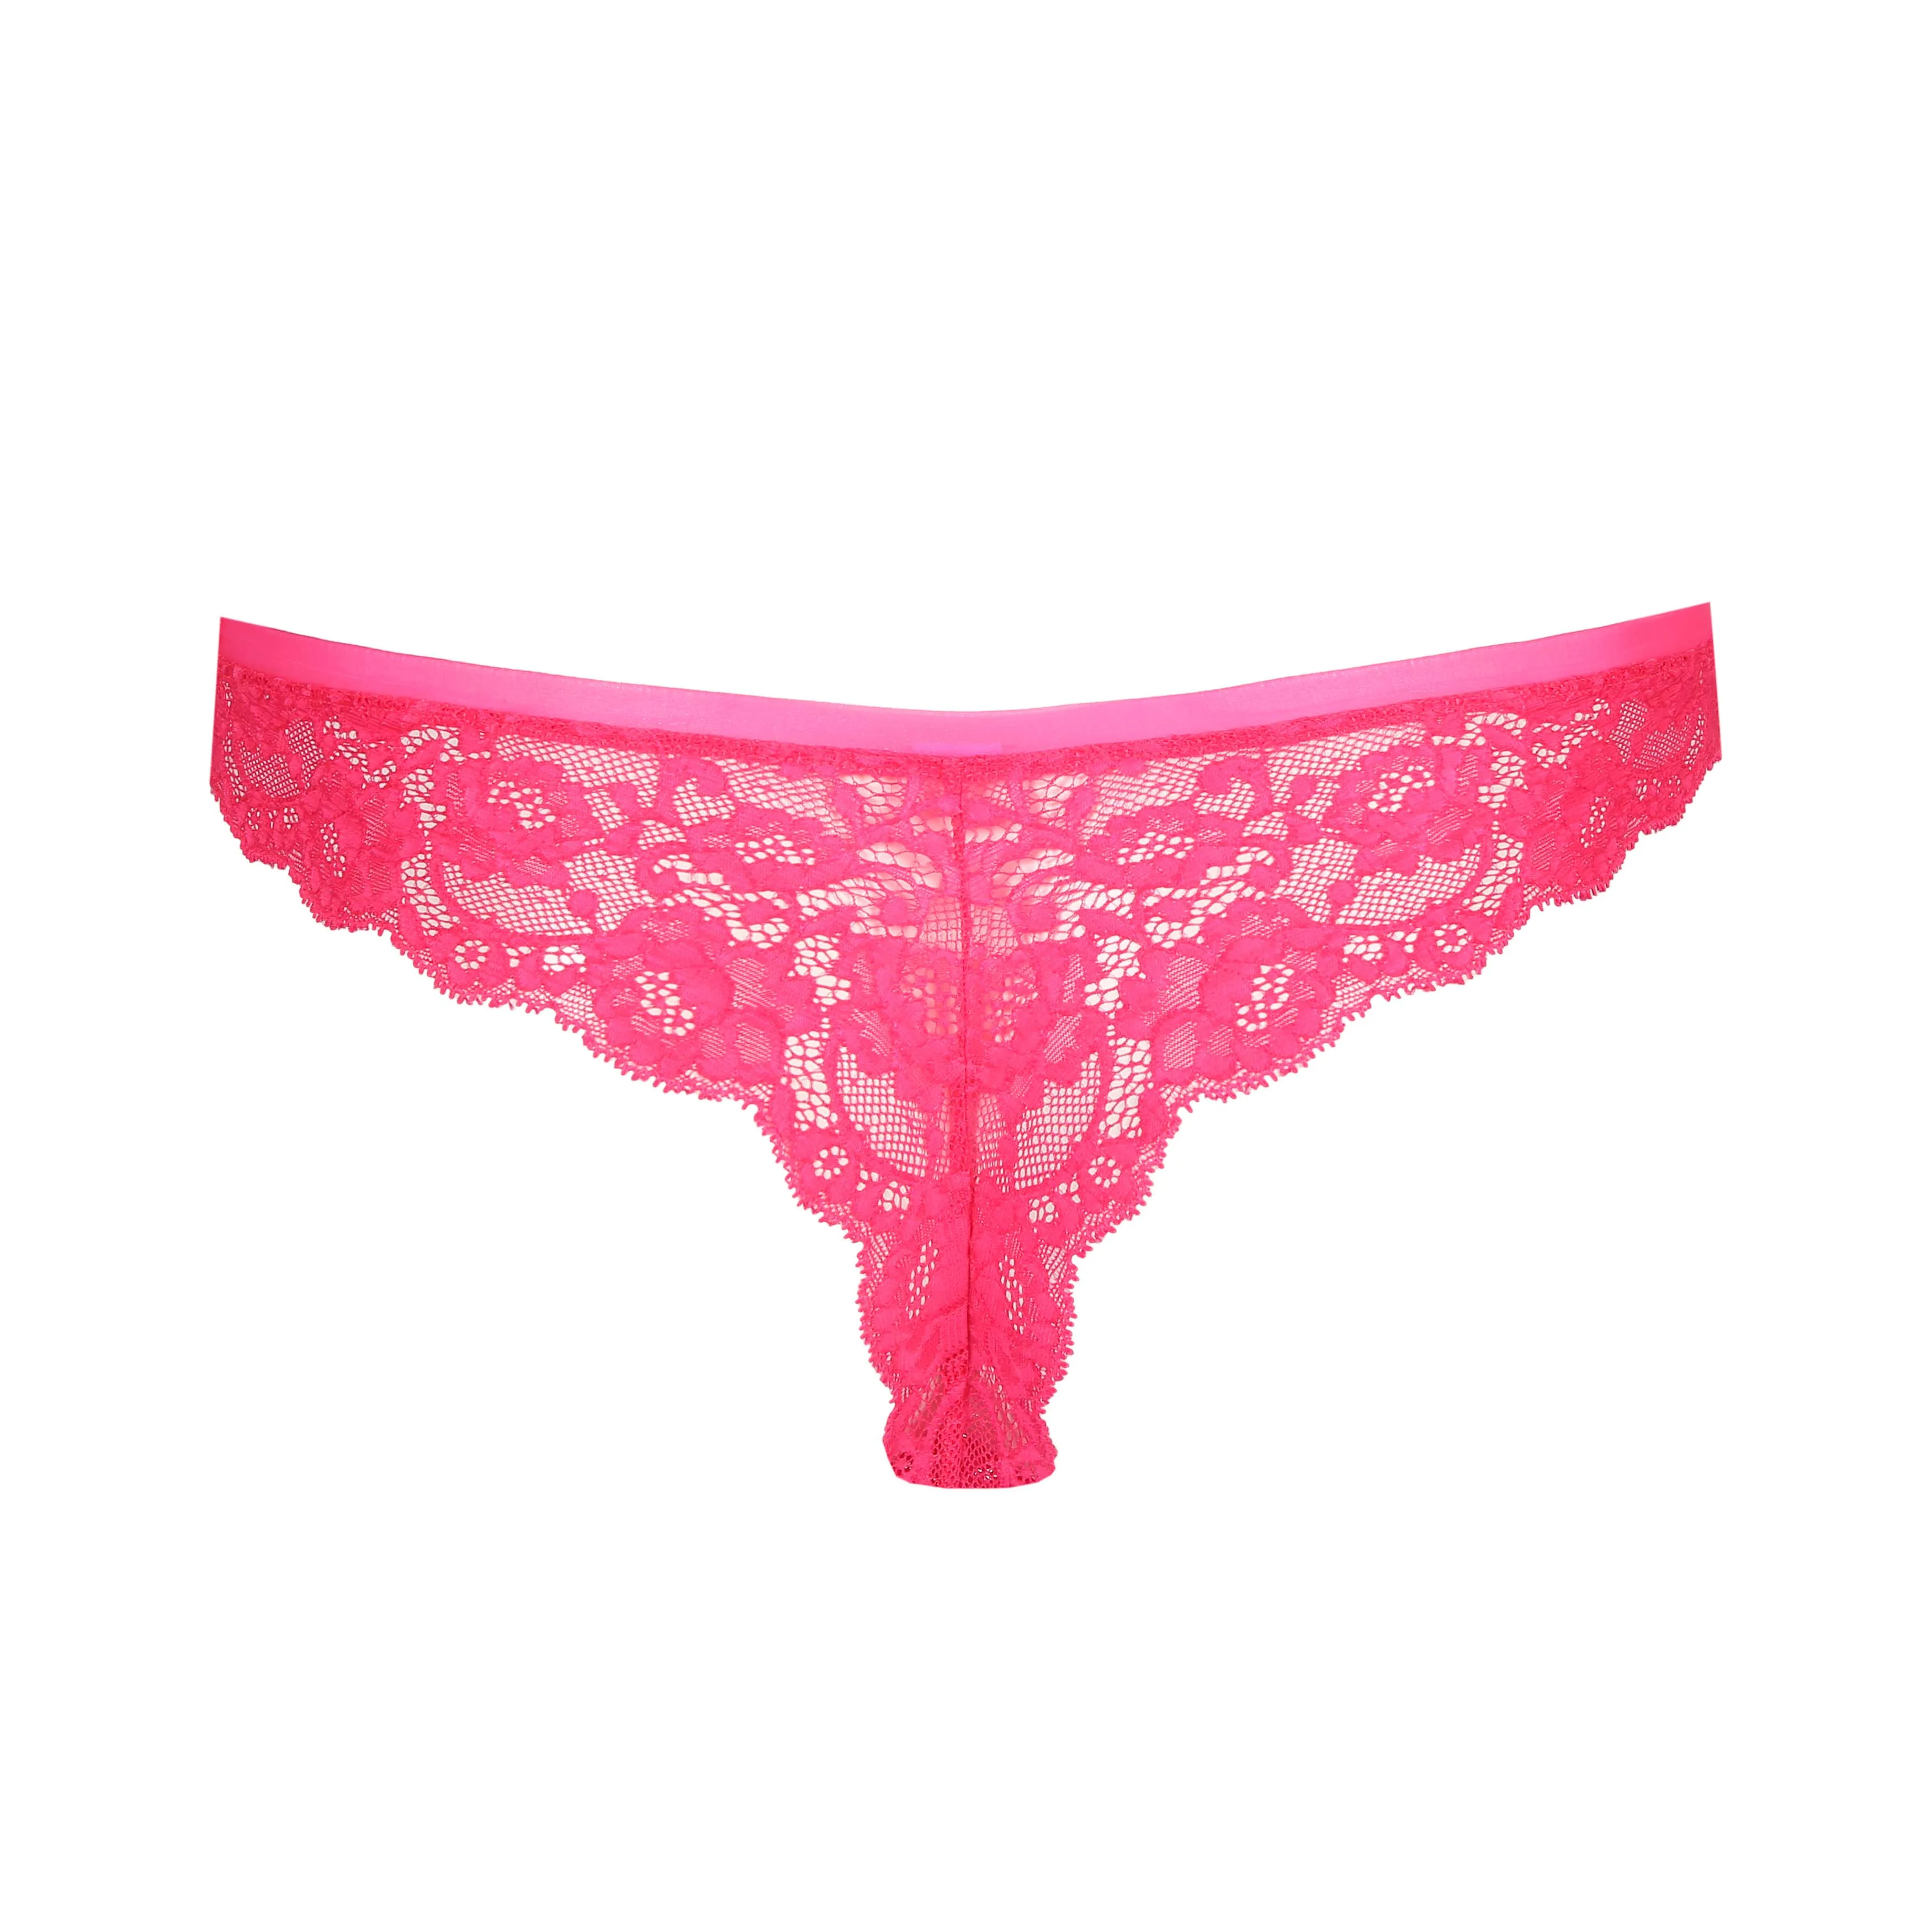 Marie Jo COLOR STUDIO pearly pink thong